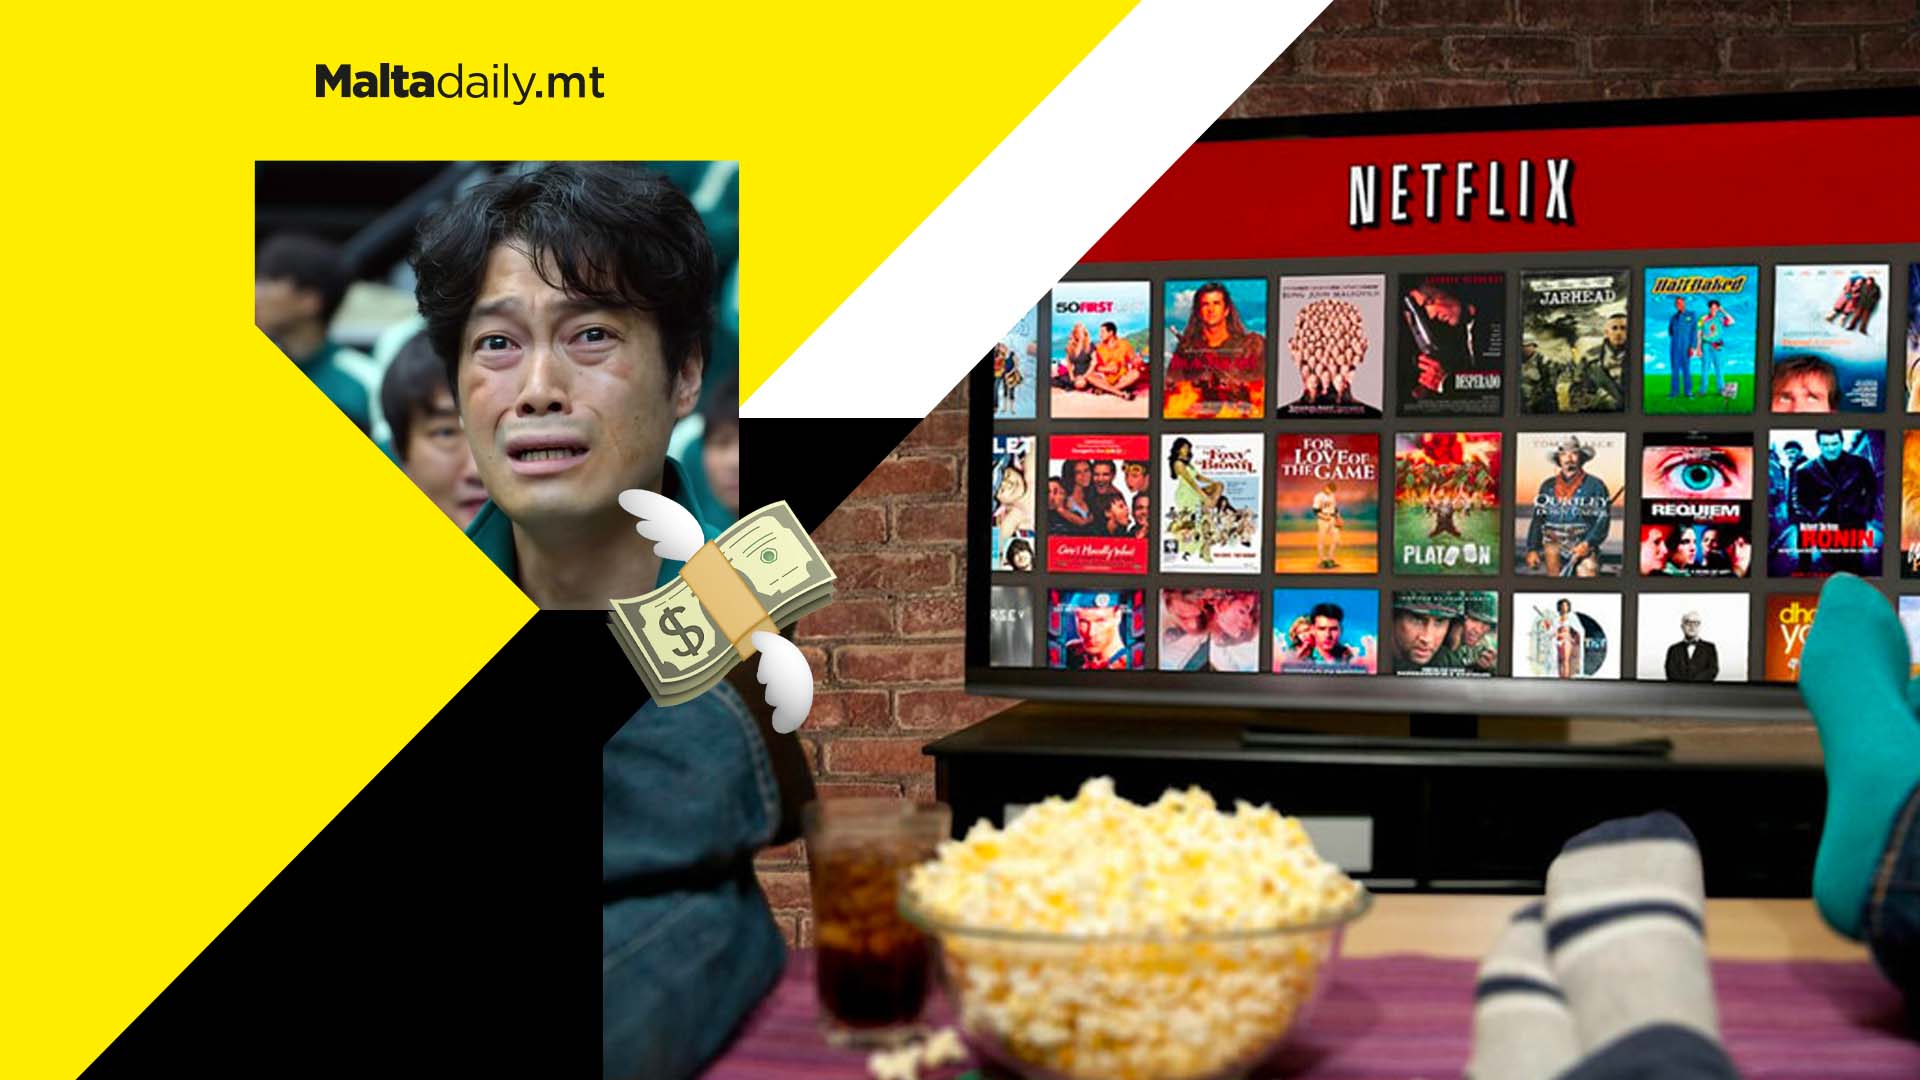 Your monthly Netflix prices are going up again